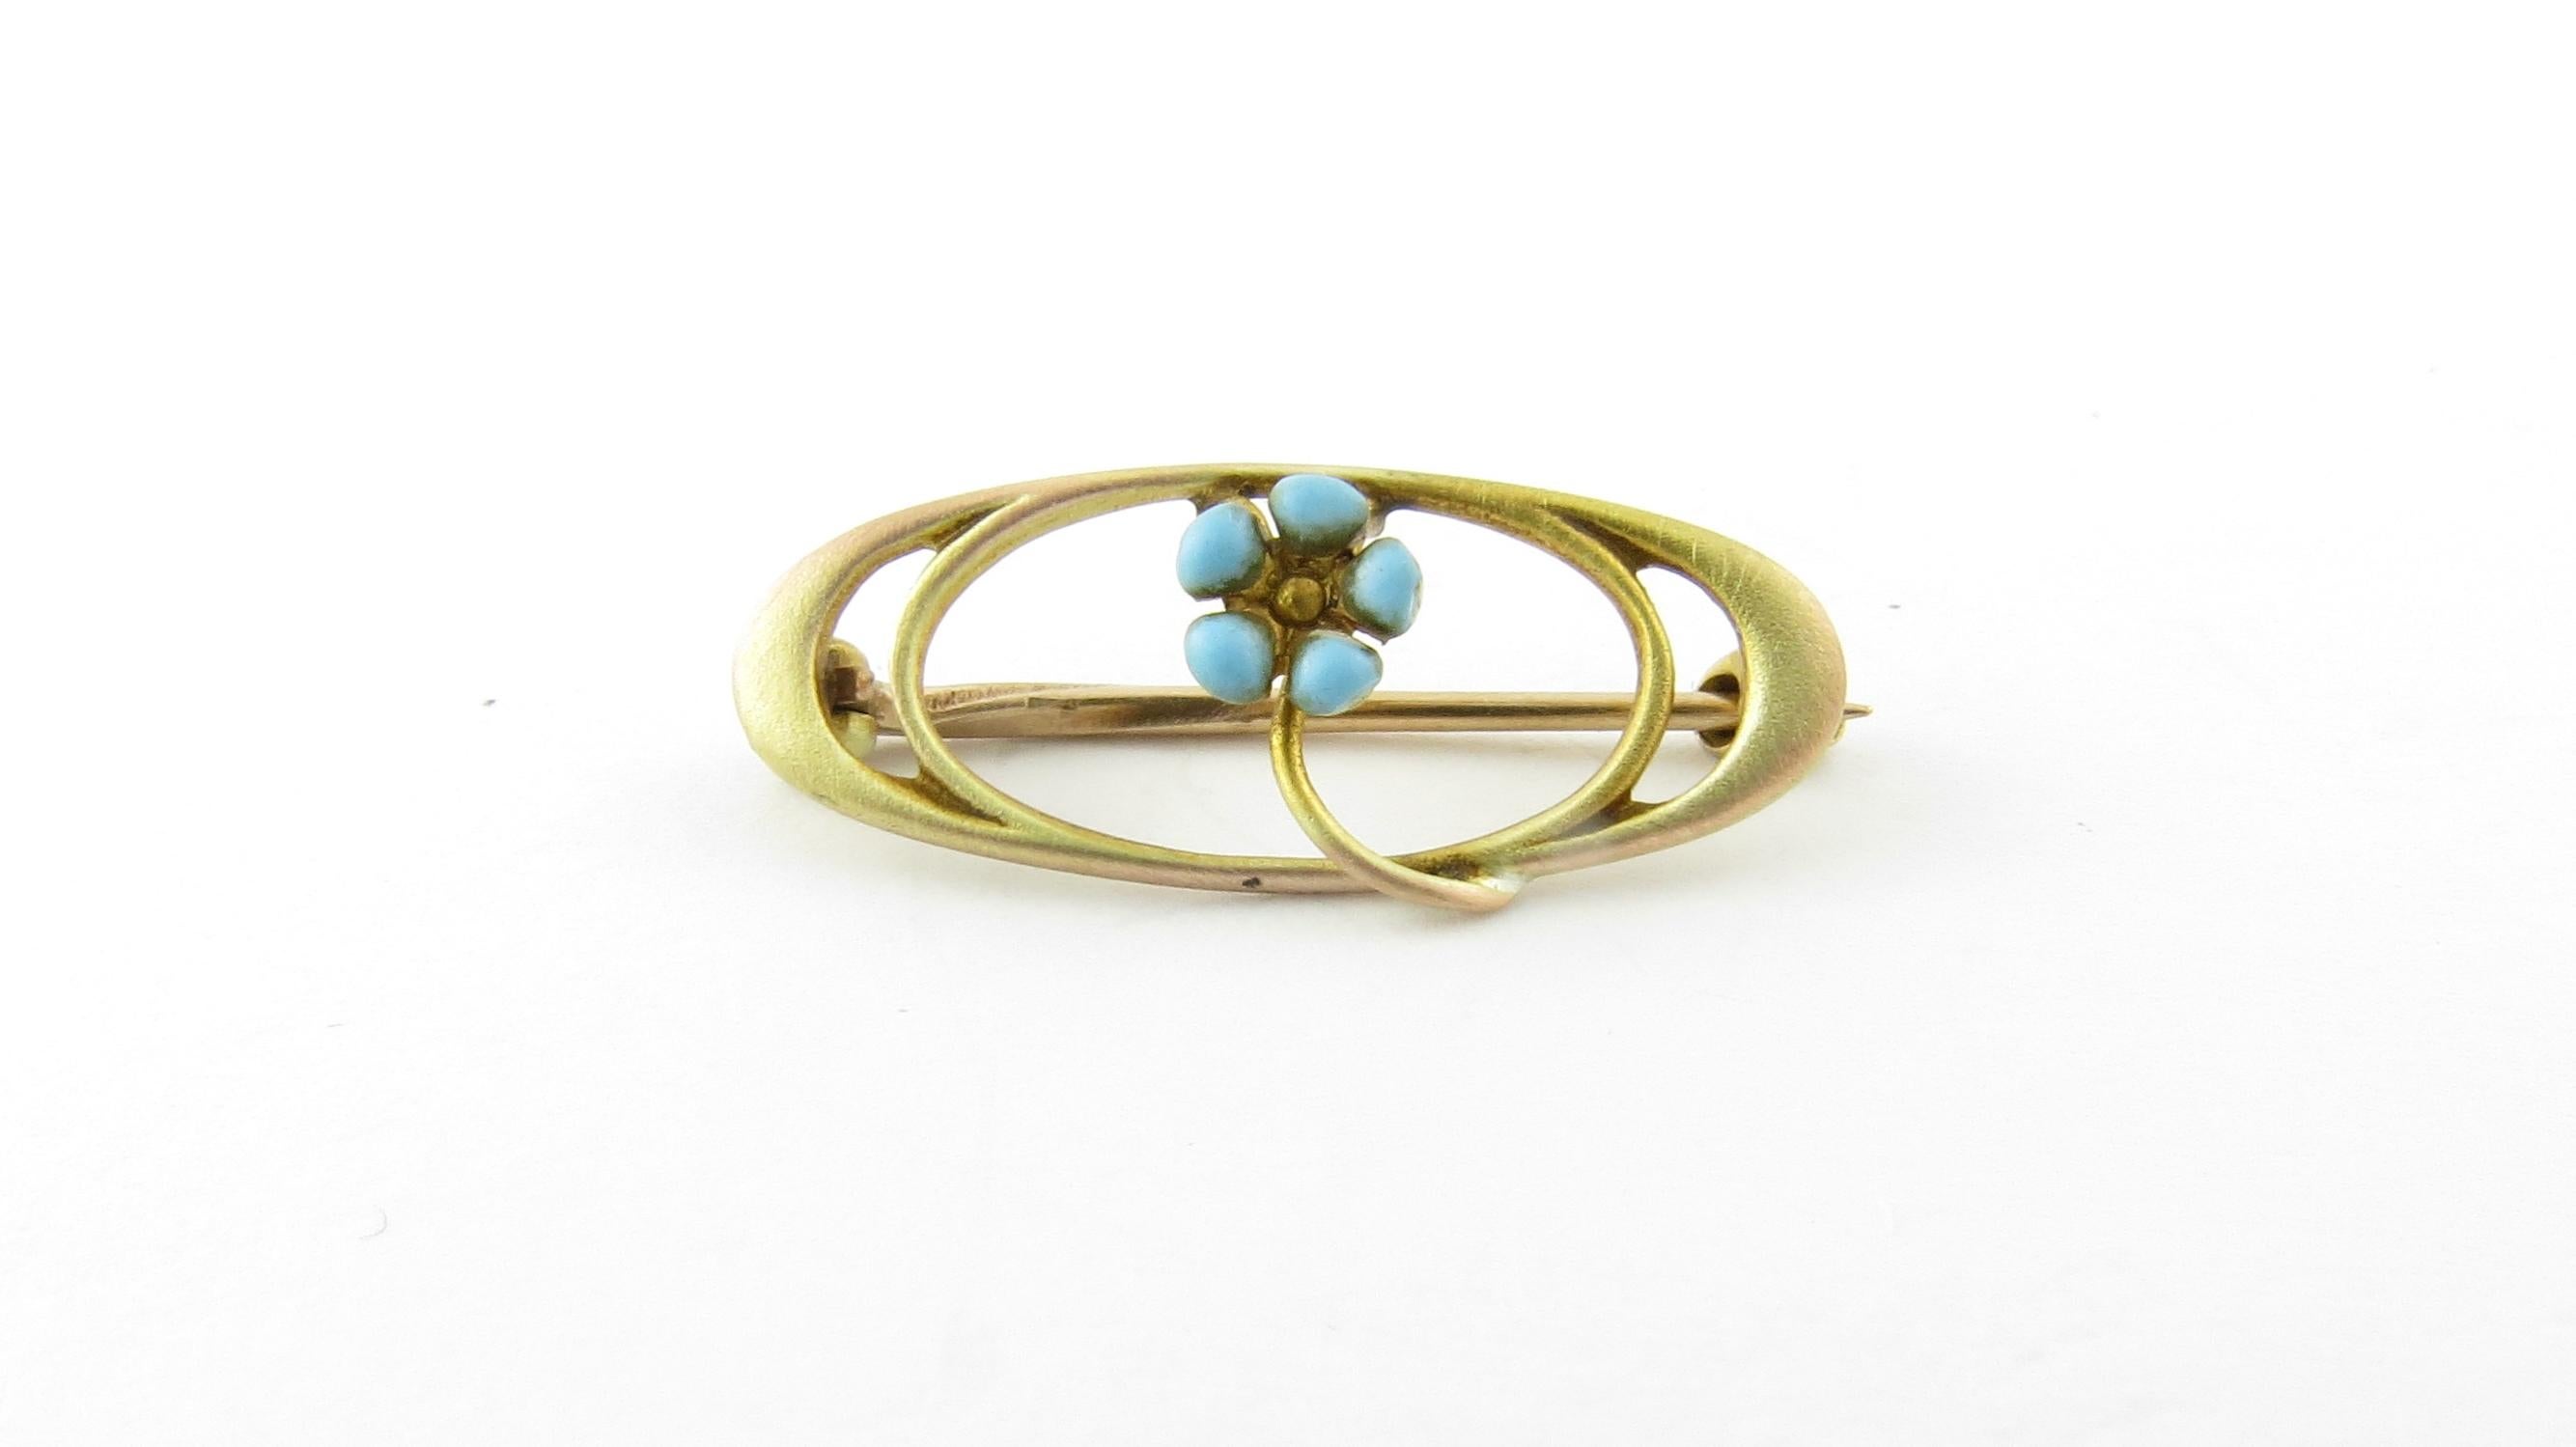 Vintage 10 Karat Yellow Gold and Enamel Brooch/Pendant.

This lovely brooch features a delicate blue enamel flower set in beautifully detailed 10K yellow gold.

Size: 9 mm x 23 mm

Weight: 0.7 dwt. / 1.1 gr.

Stamped: 10K

Very good condition,